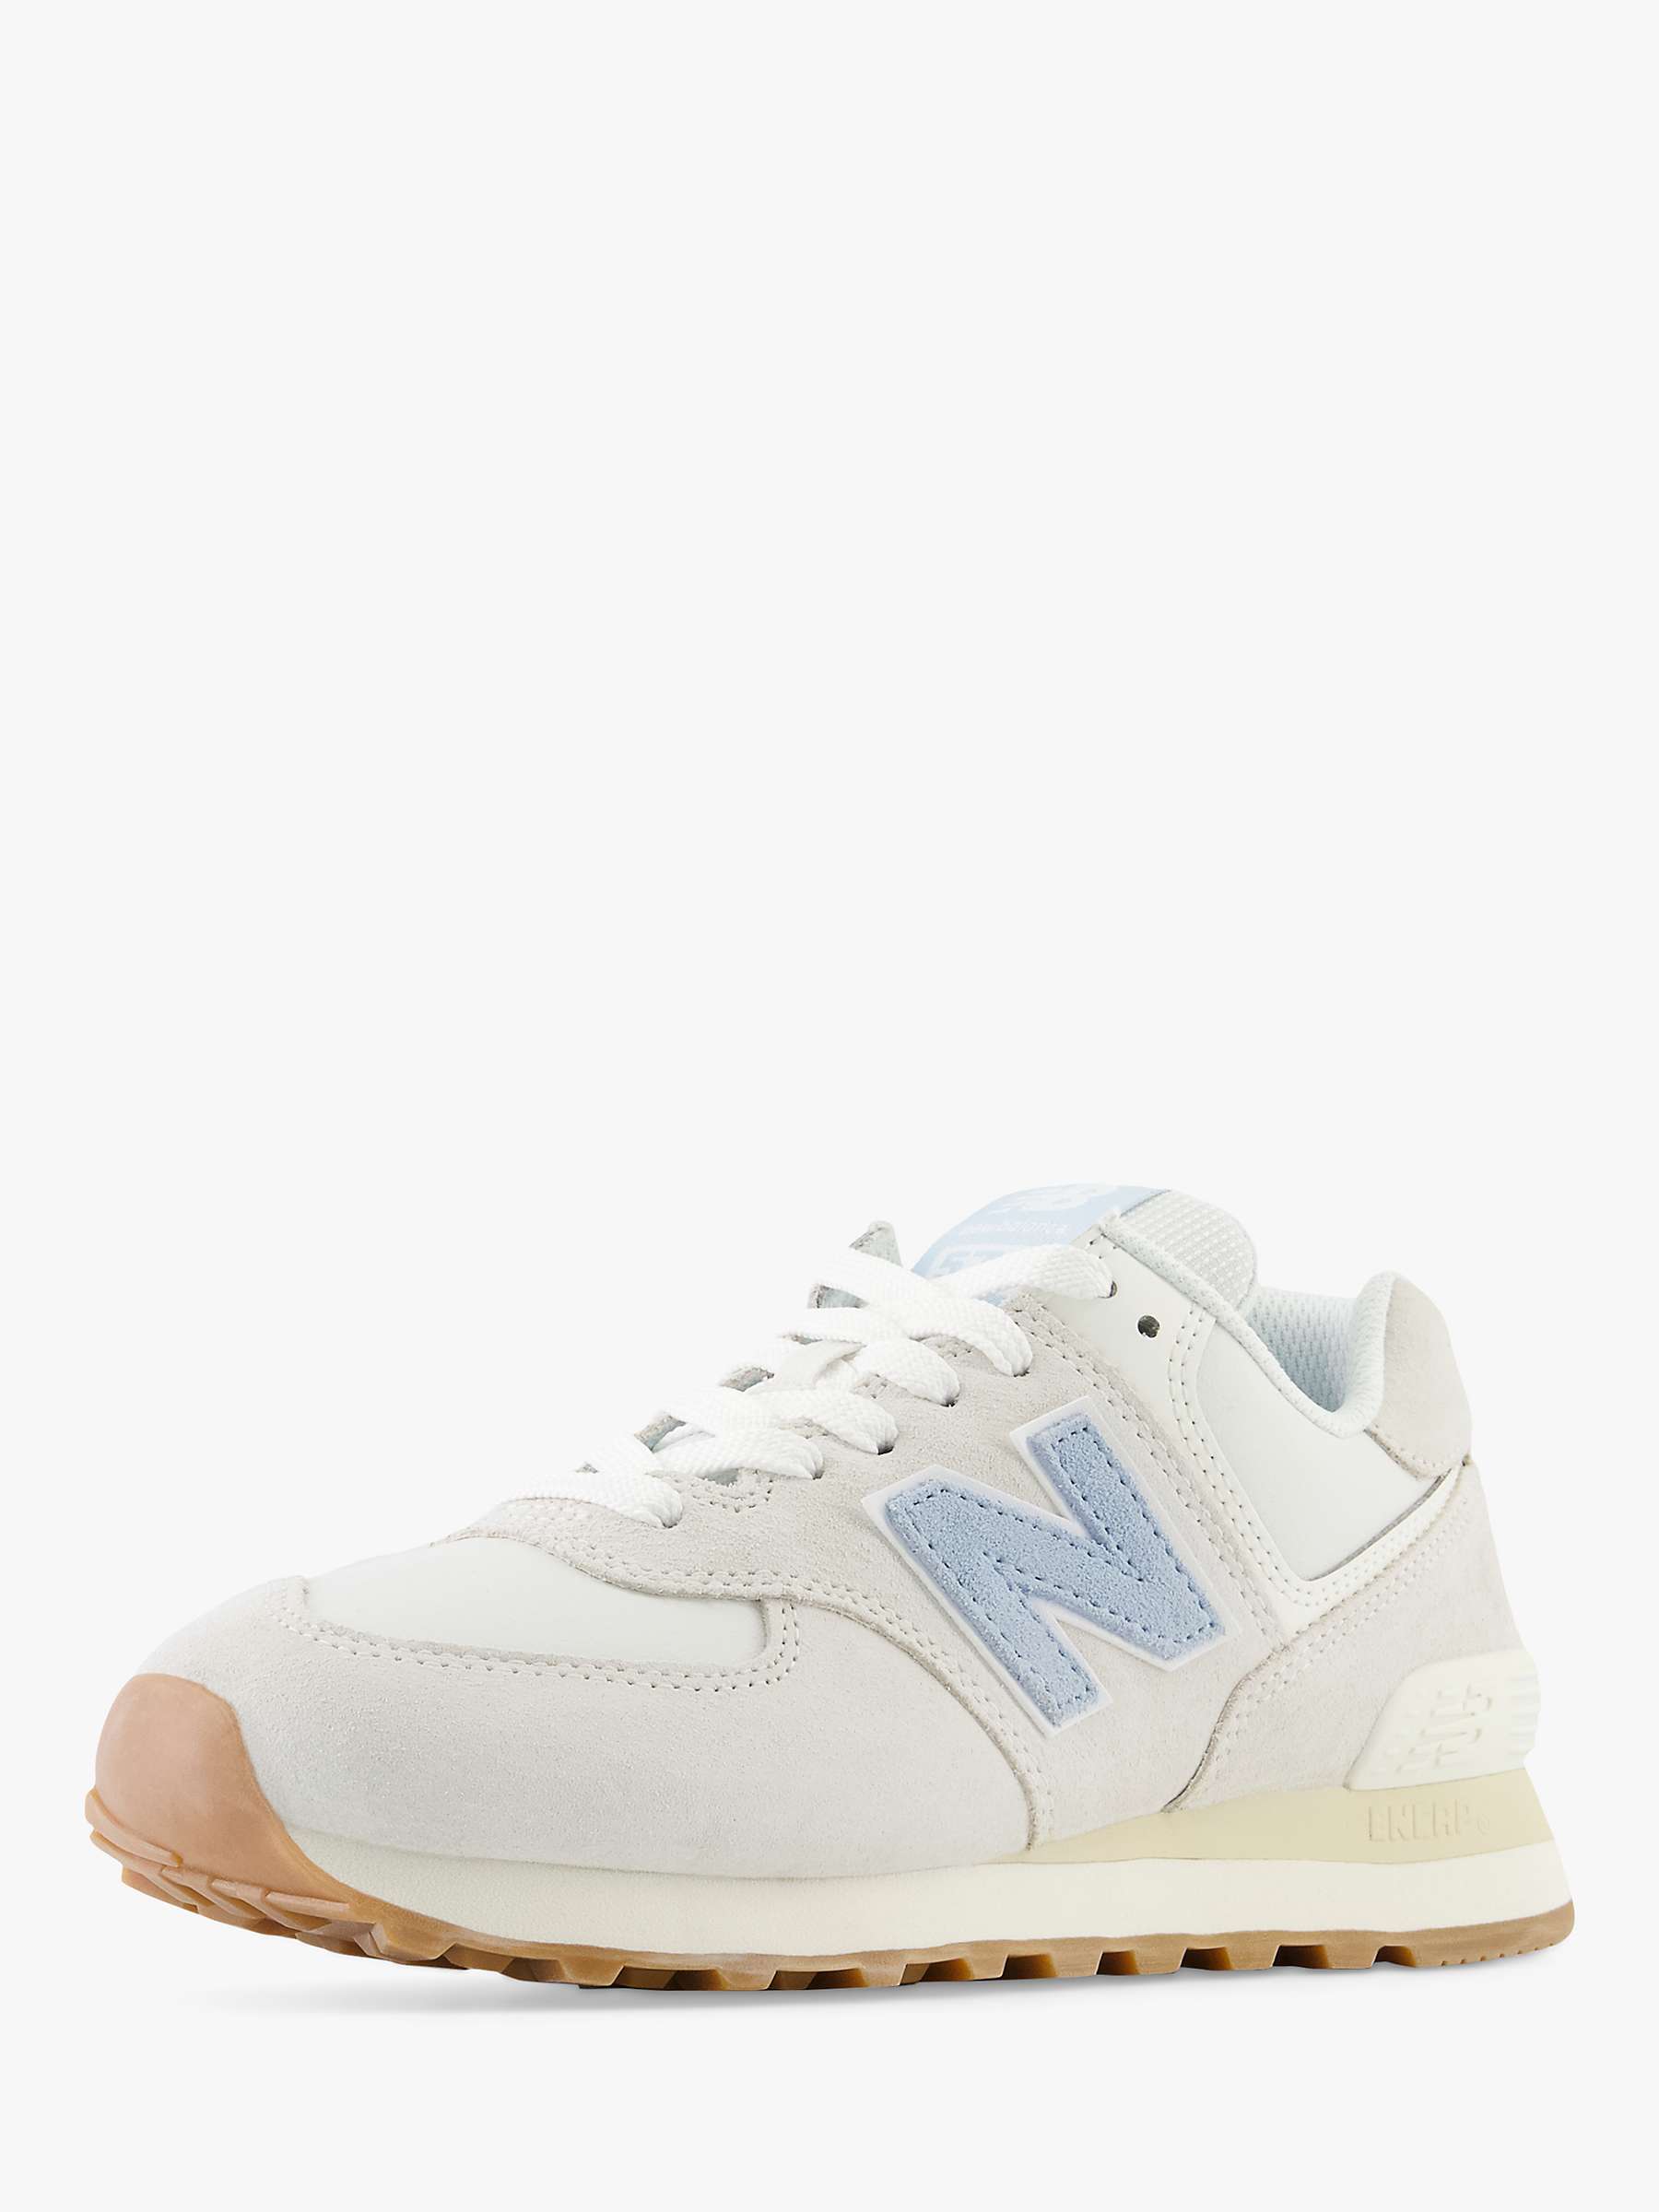 Buy New Balance 574 Suede Mesh Trainers Online at johnlewis.com